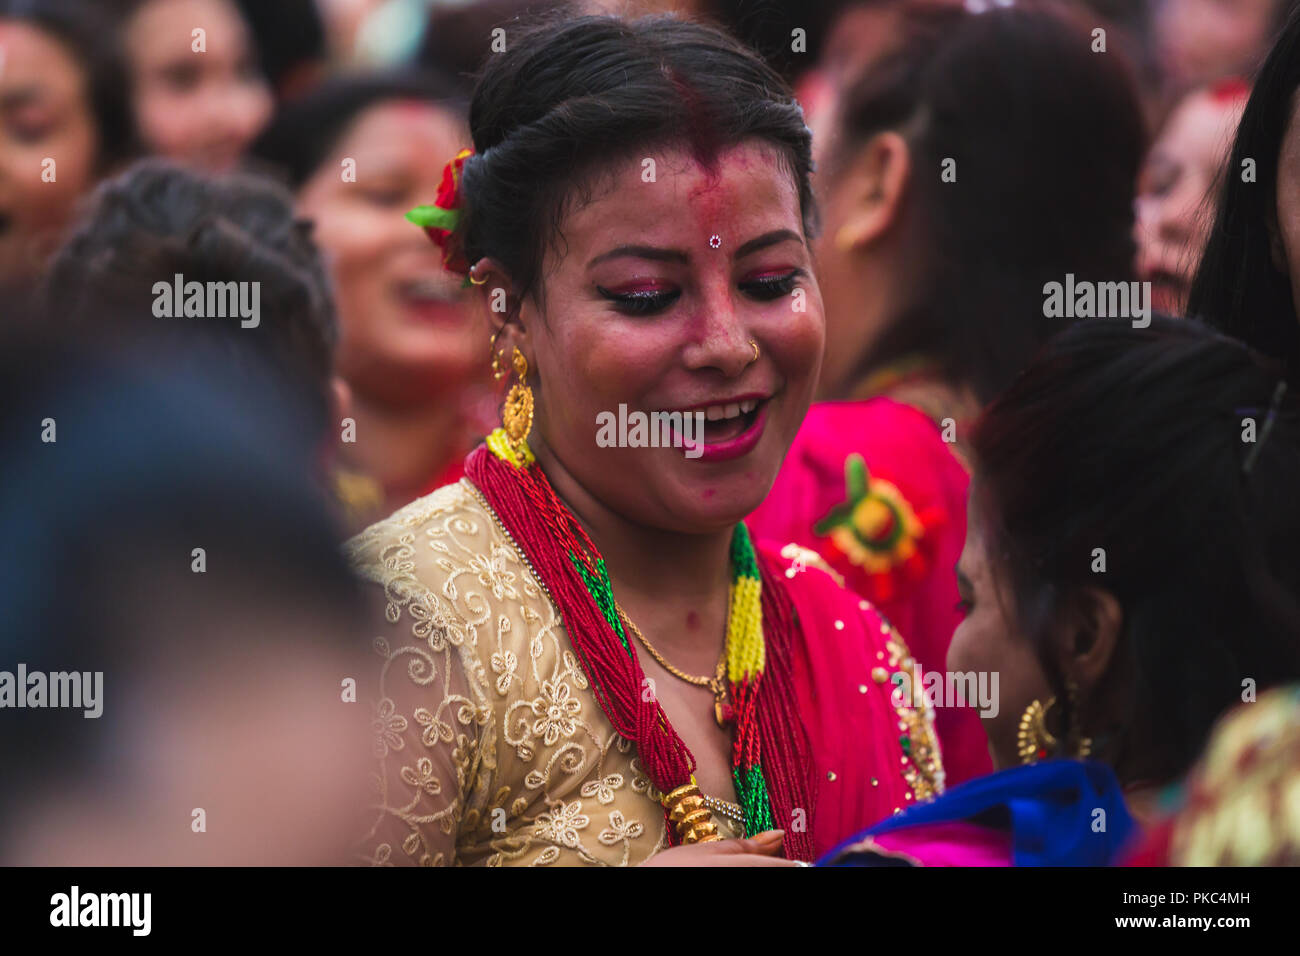 Kathmandu,Nepal - Sep 12,2018: Nepali Hindu Women Dancing at Teej Festival in Kathmandu.Hindu Nepali Women fast and wish for a prosperous life of their spouse and family on this festival.The festivals for women, include dancing, singing, getting together with friends,, wearing red, green or orange clothes, sharing festive foods Credit: Nabaraj Regmi/Alamy Live News Stock Photo